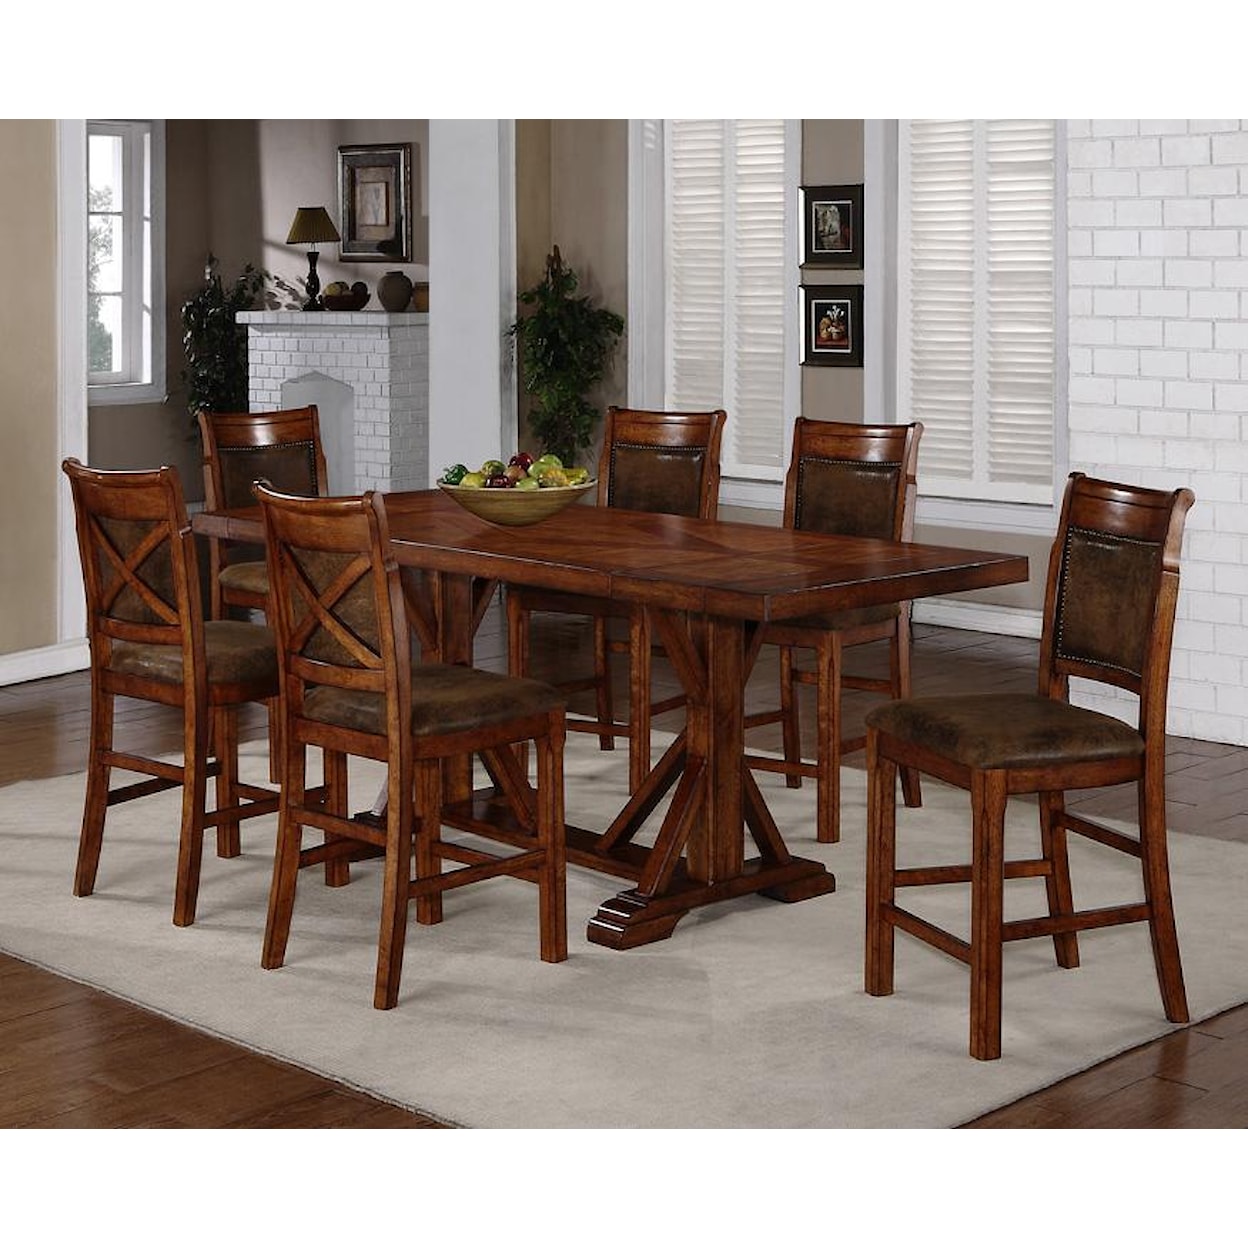 Holland House 1288 7-Piece Counter Height Dining Set